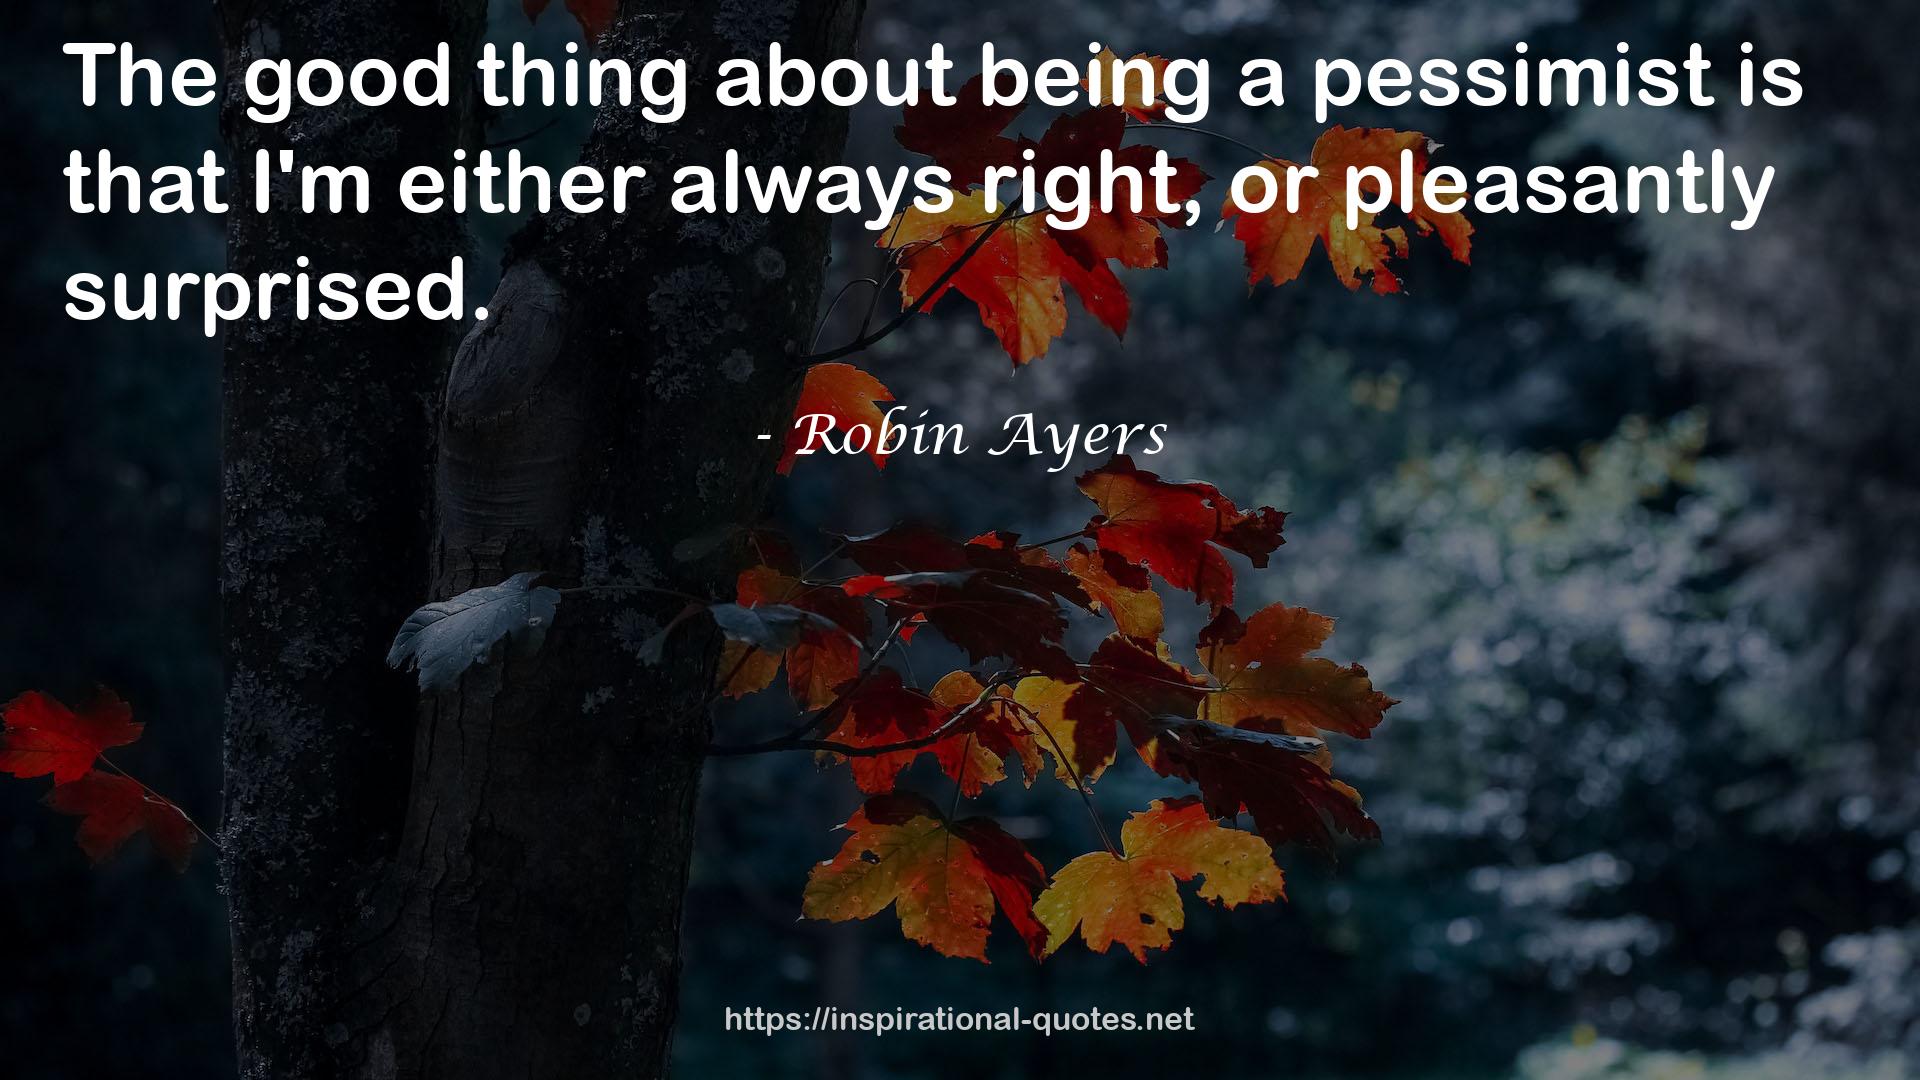 Robin Ayers QUOTES